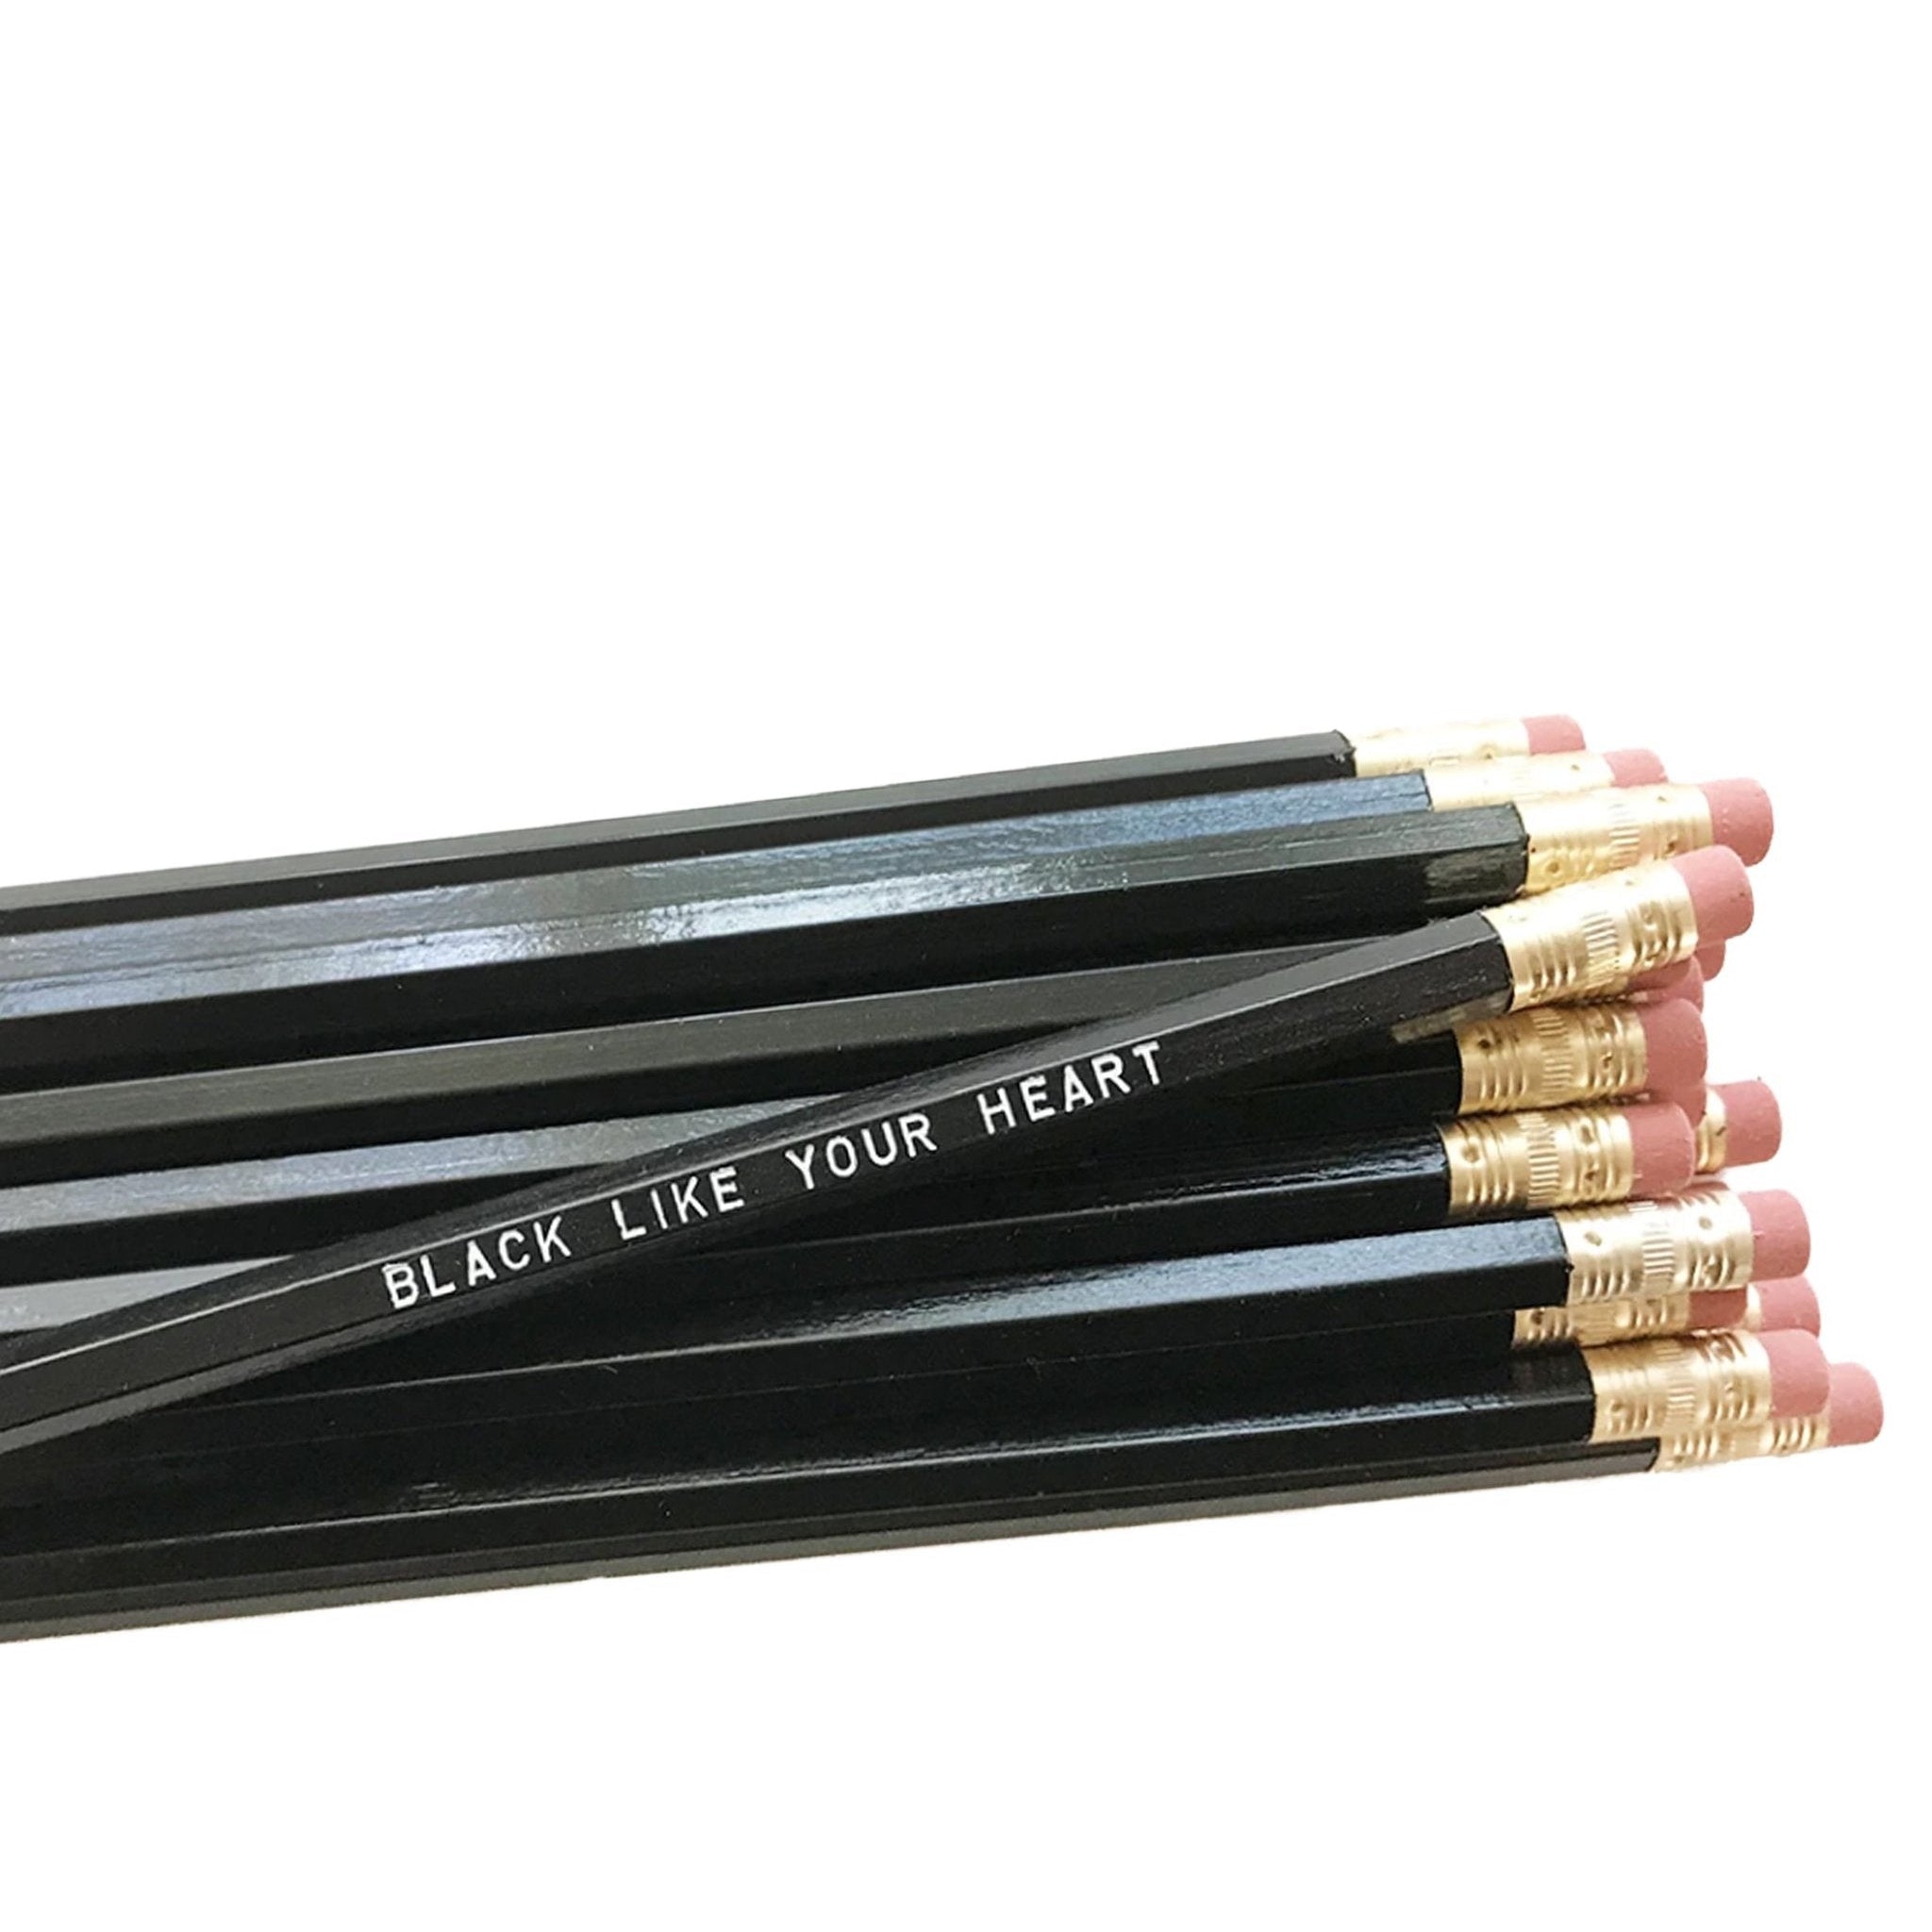 https://www.quirkycrate.com/cdn/shop/products/Black-Like-Your-Heart-Wooden-Pencil-Set-in-Black-Set-of-5-Funny-Sweary-Profanity-Pencils.jpg?v=1684022310